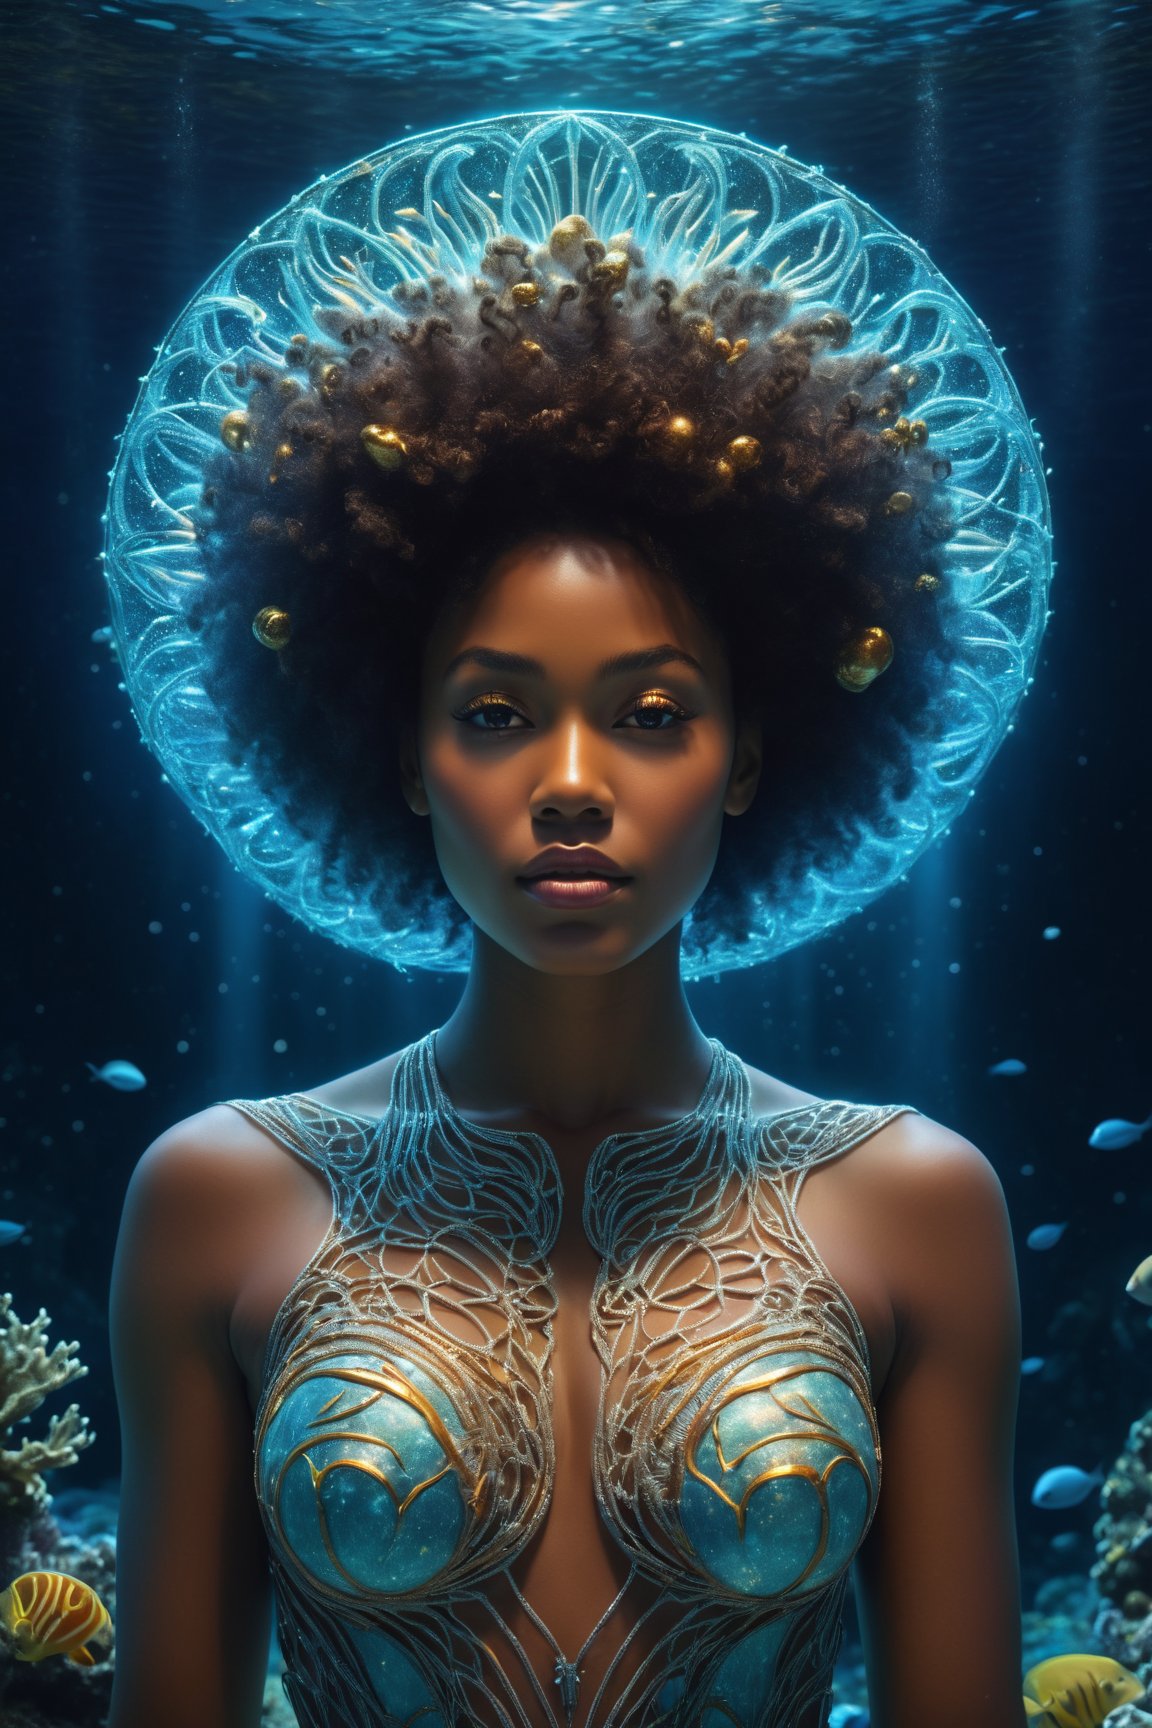 (best quality,8K,highres,masterpiece), capturing a surreal and ethereal portrait of a woman whose presence intertwines the mystical essence of space with the enchanting depths of the ocean. Her afro forms a halo around her head, reminiscent of Saturn's rings, crafted from highly detailed golden filigree with intricate motifs resembling organic tracery. This ghostly three-dimensional effect, surrounded by a glowing aura, merges cosmic dust and glowing particles to create a magical atmosphere. Instead of traditional space, she is set against an animated coral reef background, where the realism of the seabed and bright spots of marine life add a vivid contrast to her cosmic attributes. The portrait combines the techniques of hyperrealism and soft and sharp focus to highlight the seamless blend of celestial and underwater elements. The use of natural light and perfect composition, characteristic of award-winning photography, enhances the hyper-detailed, animated qualities of both the subject and her surroundings, achieving a masterpiece of visual art that transcends traditional boundaries.